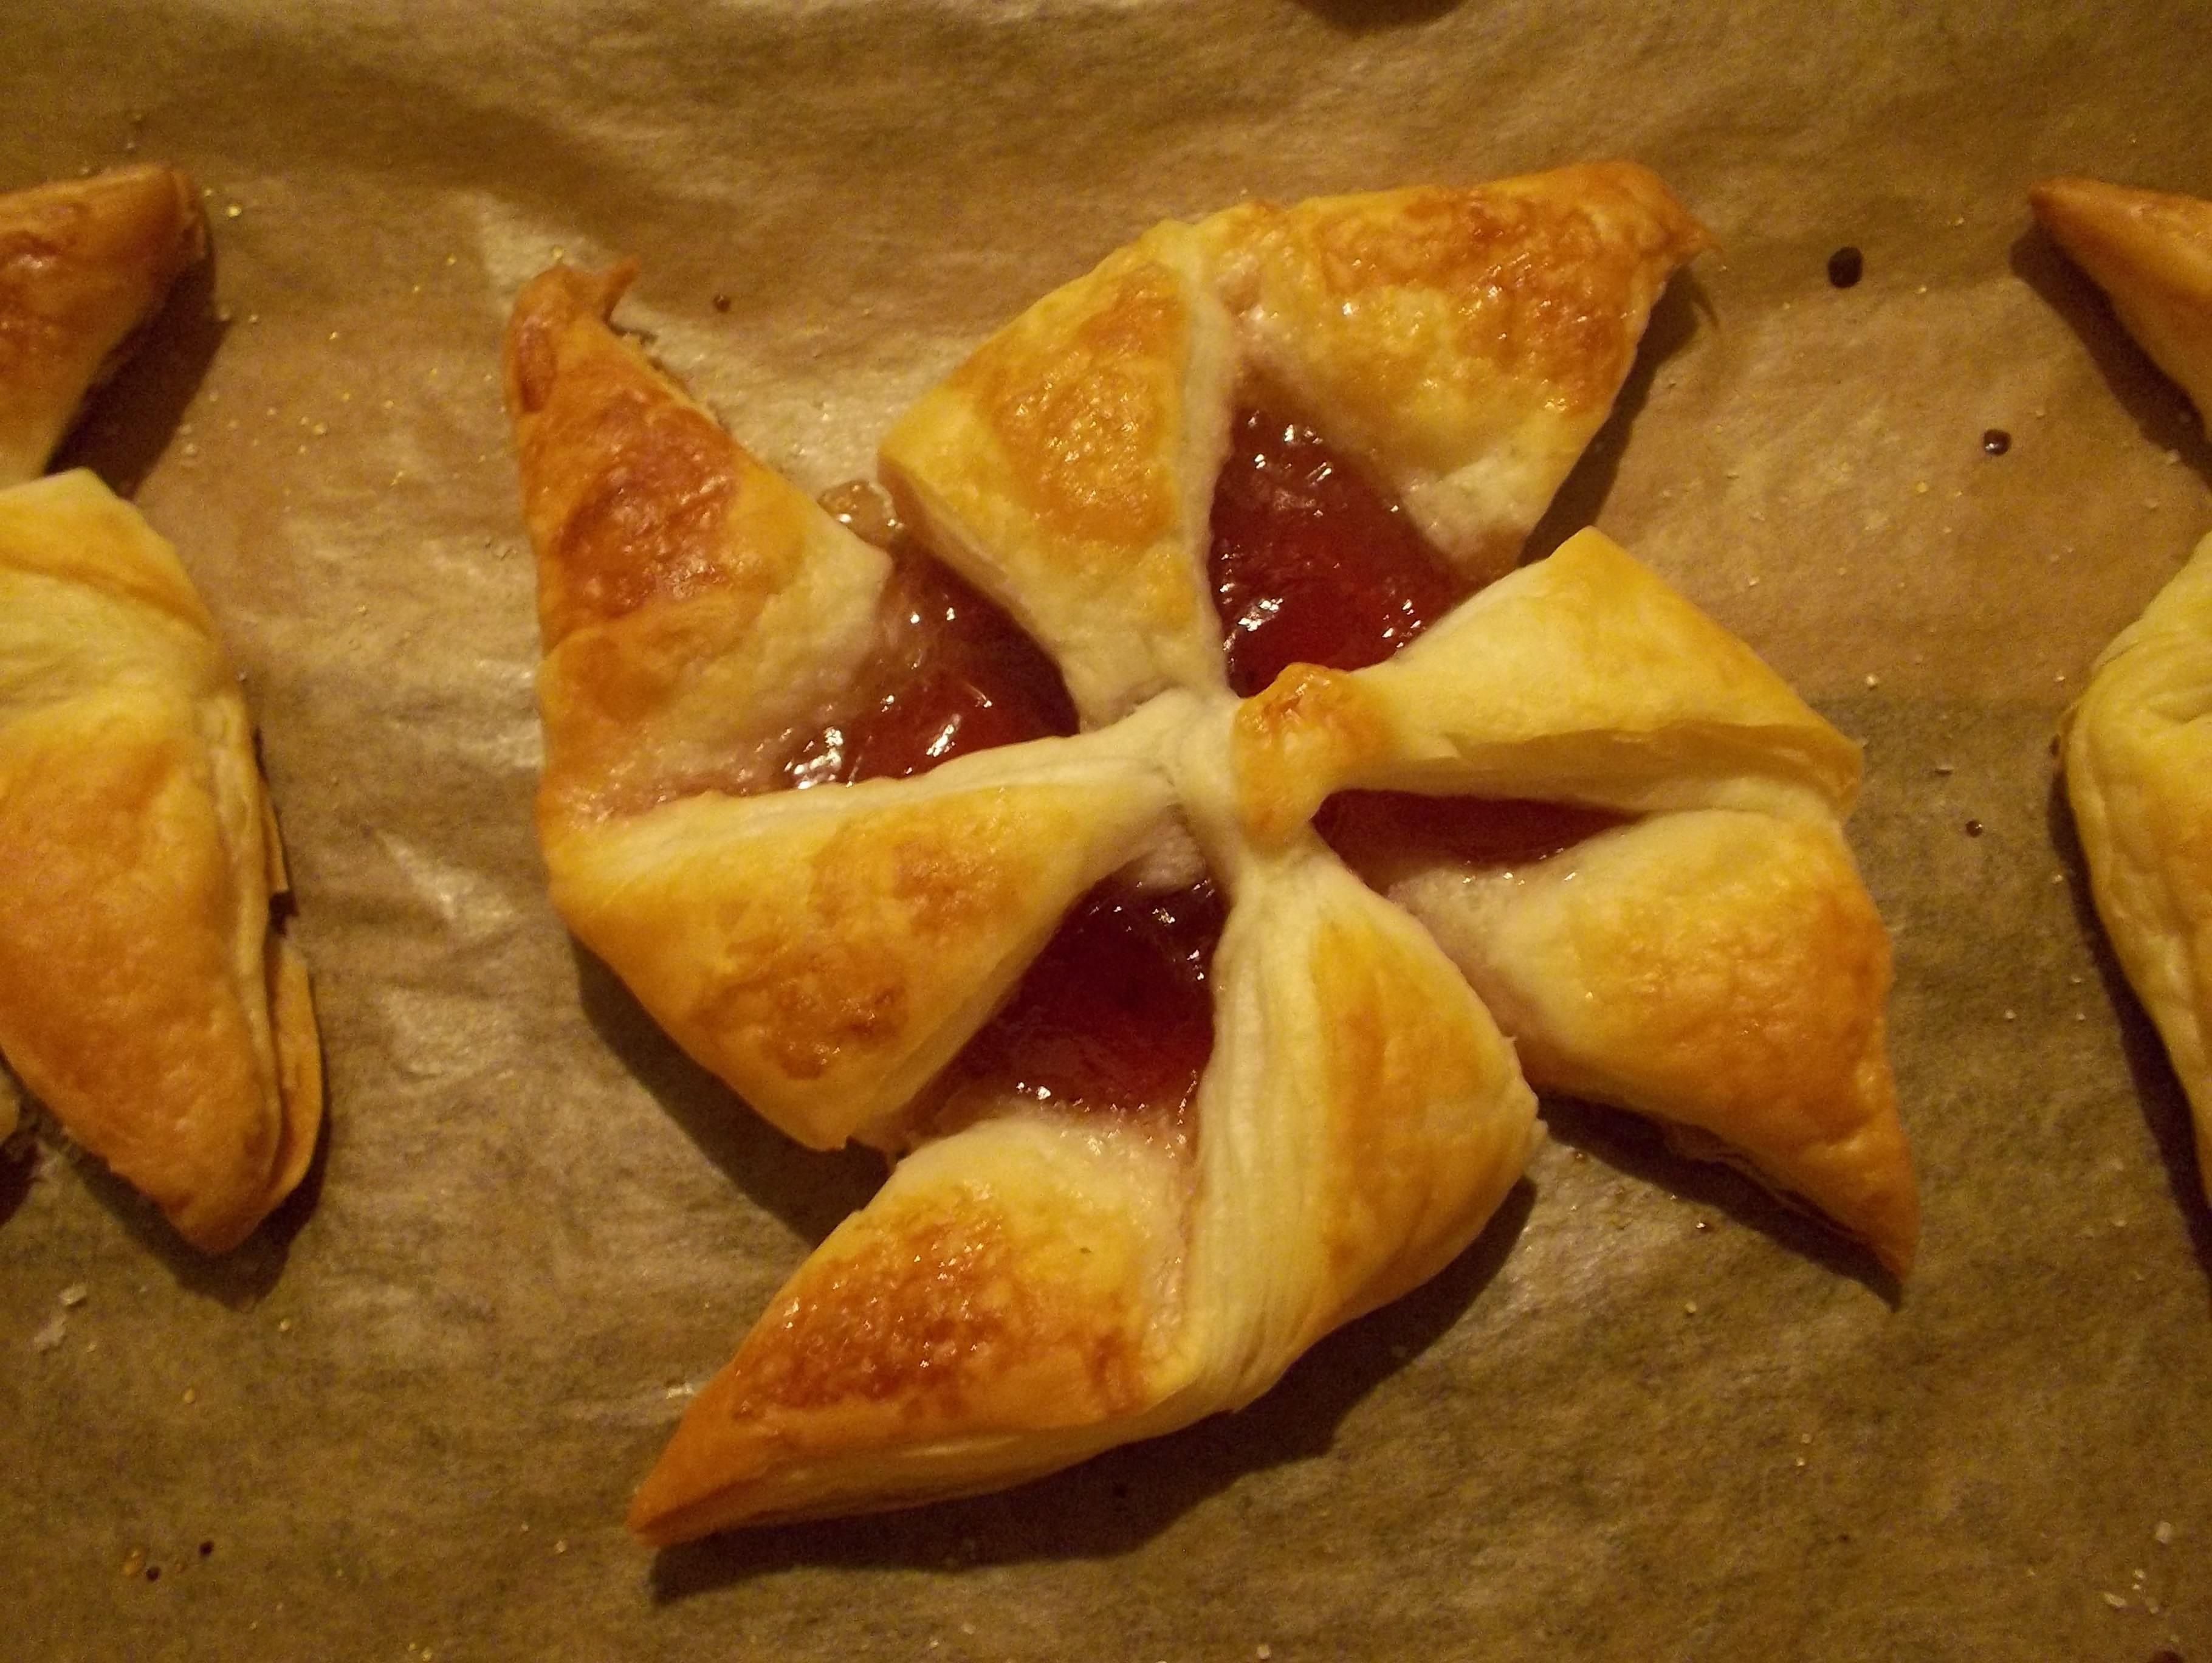 news years eve party recipe star tart with jam filling